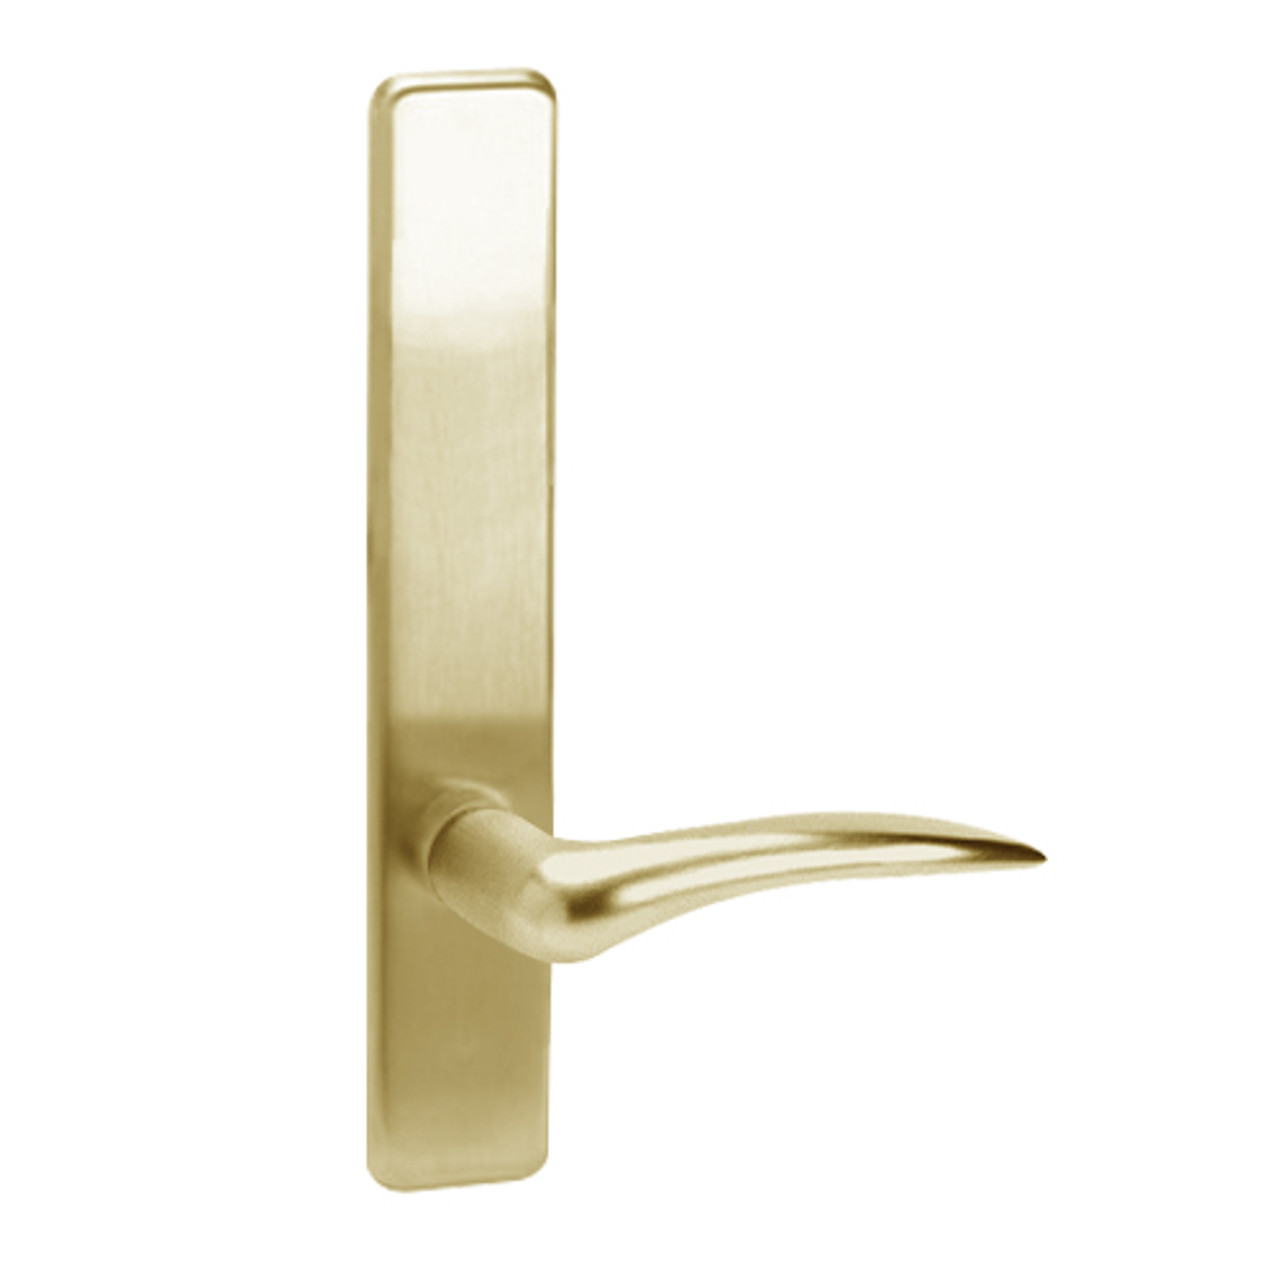 D855-606-LHR Corbin ED4000 Series Exit Device Trim with Classroom Dirke Lever in Satin Brass Finish